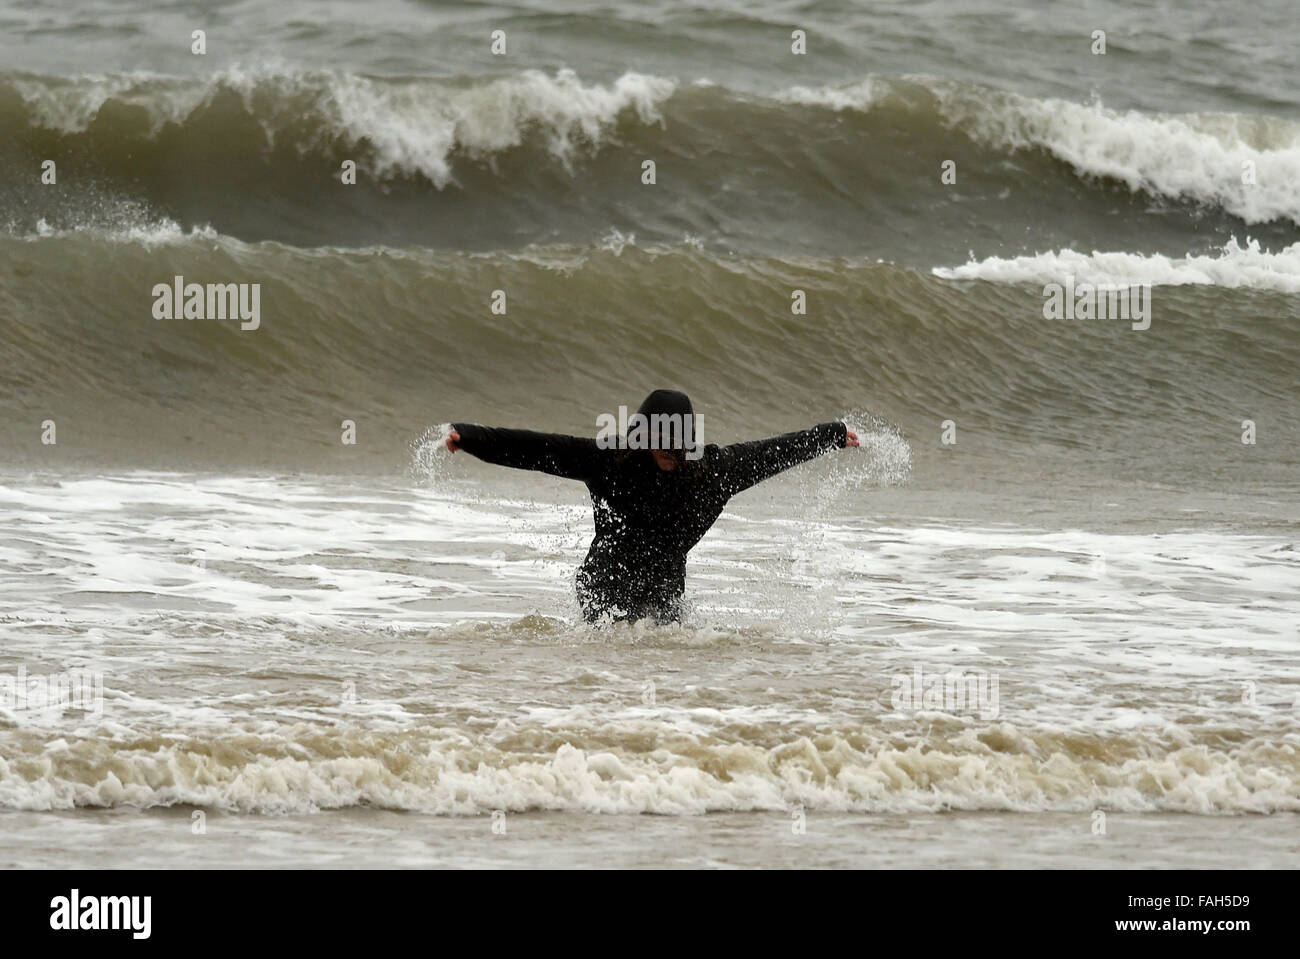 Boy in the sea fully clothed during stormy weather Stock Photo